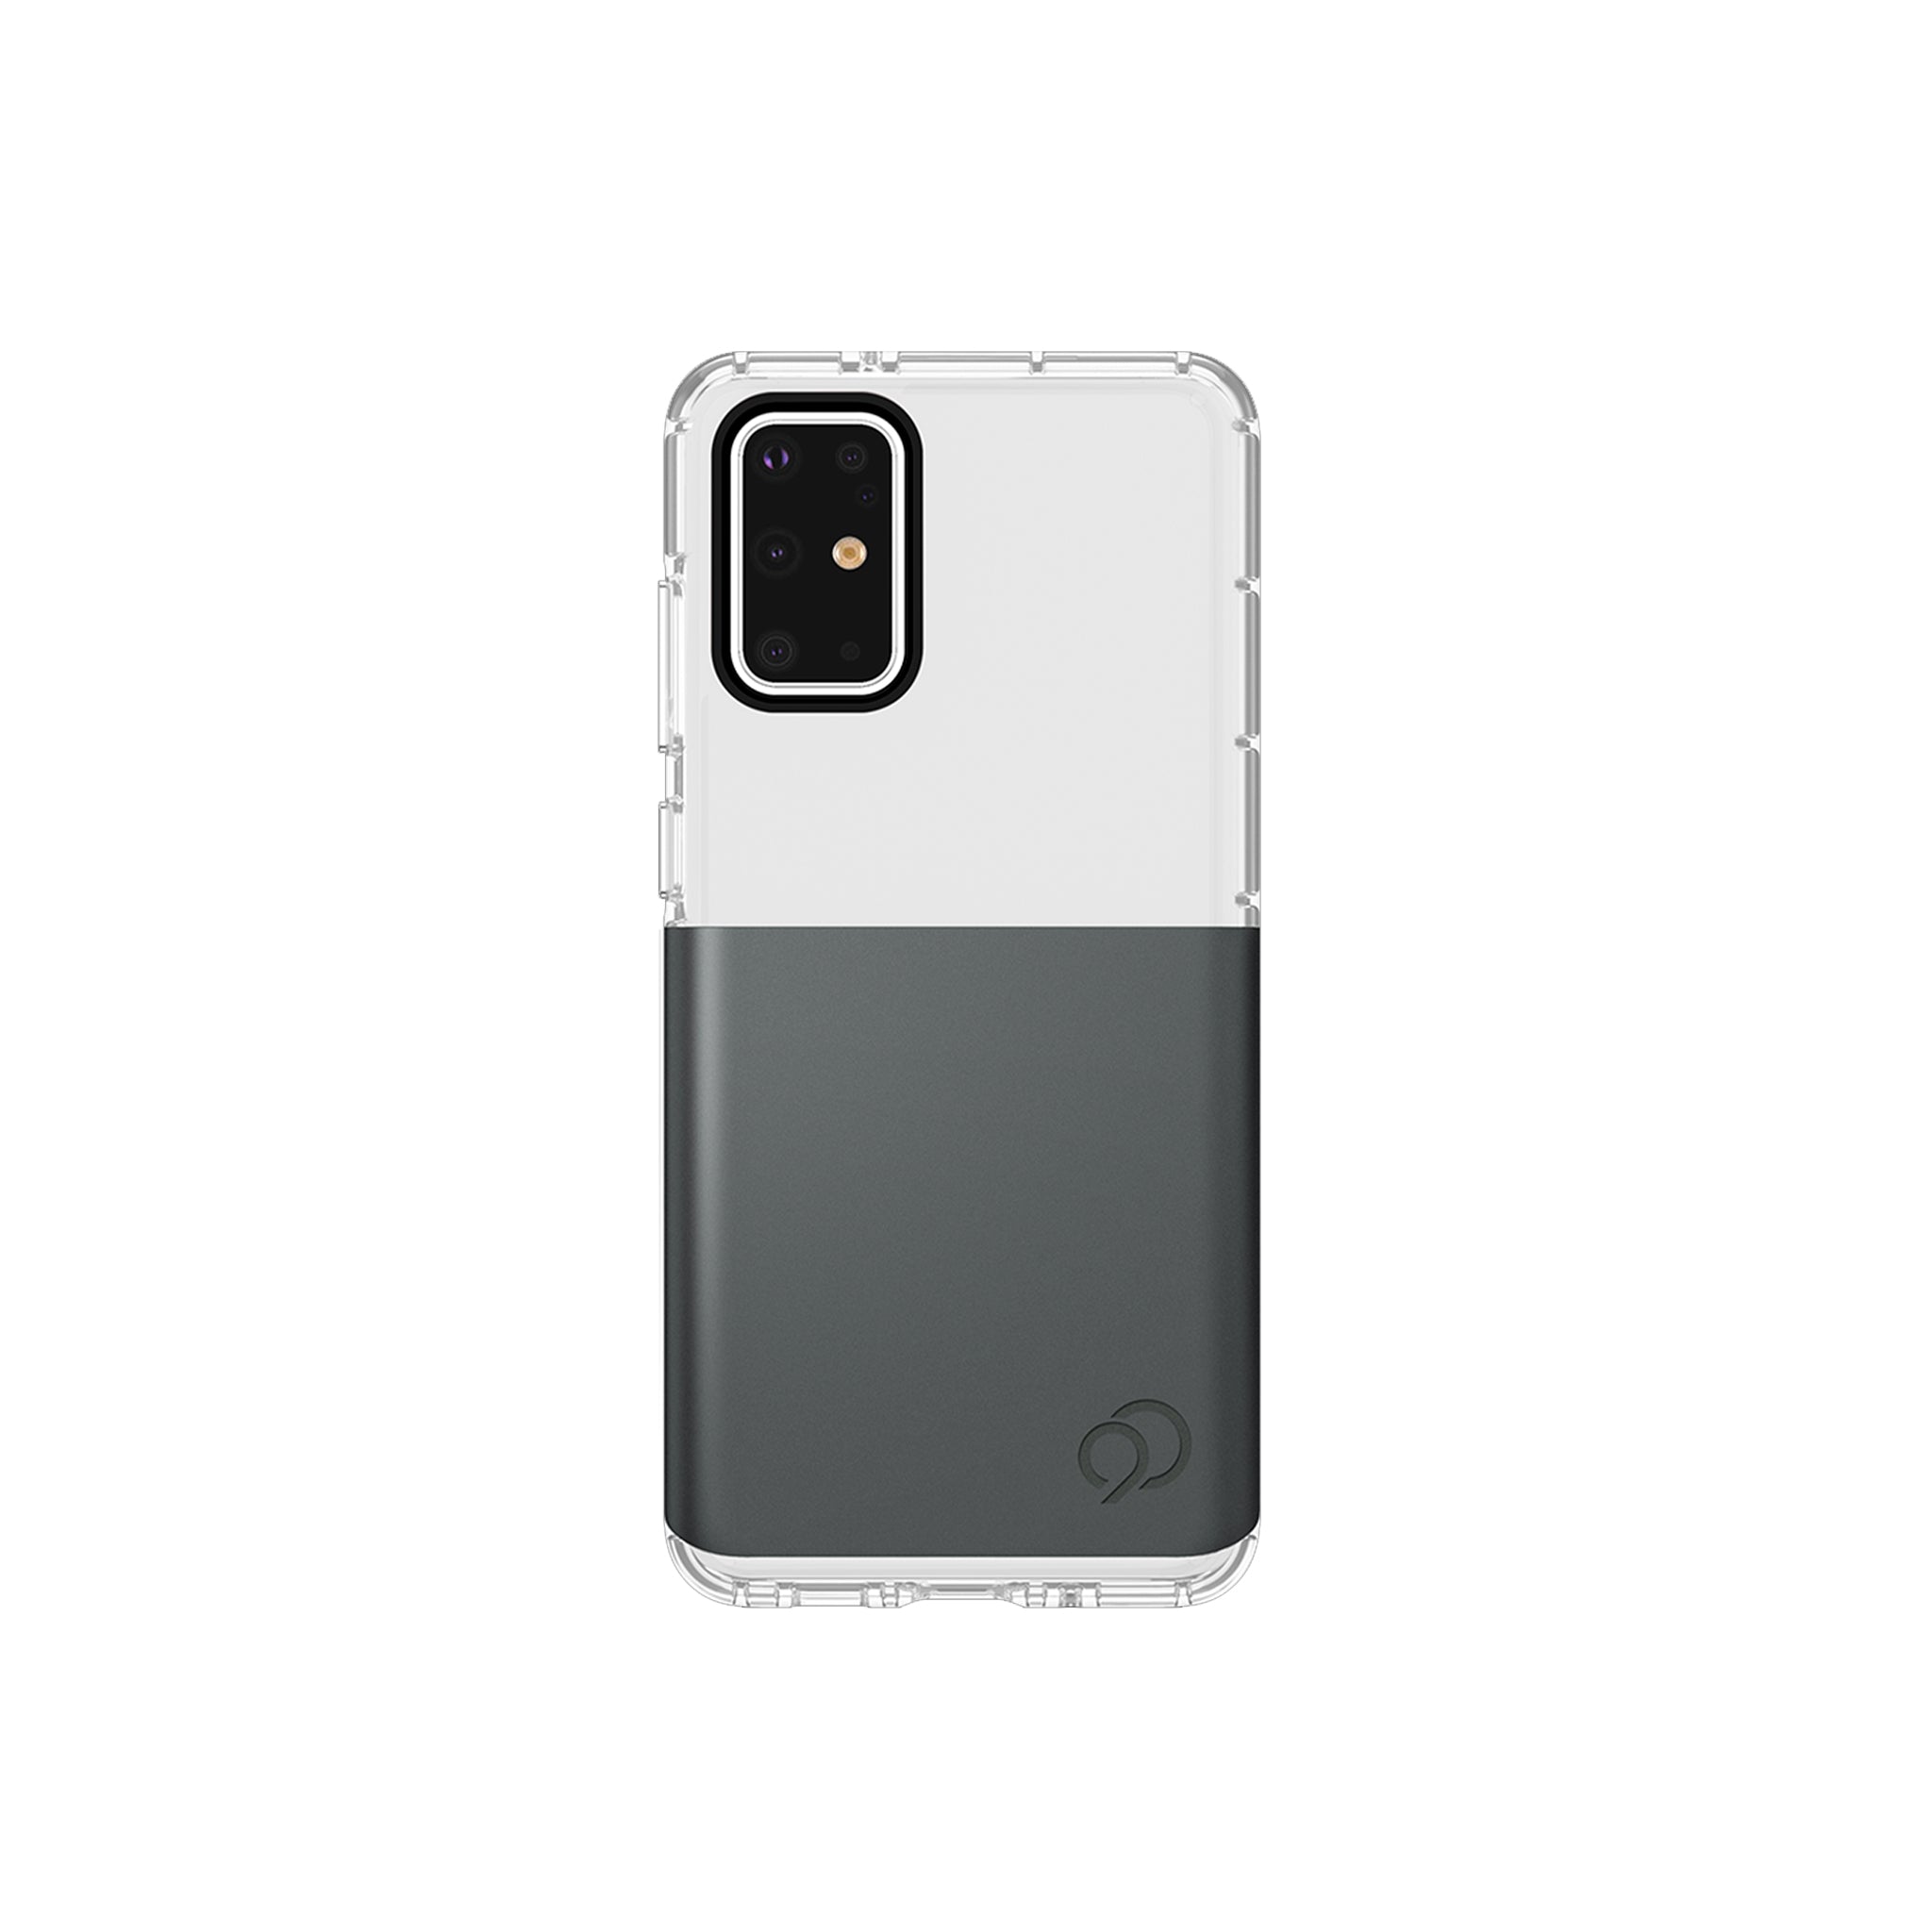 Nimbus9 - Ghost 2 Pro Case With Mount For Samsung Galaxy S20 Plus - Gunmetal Gray And Pure White